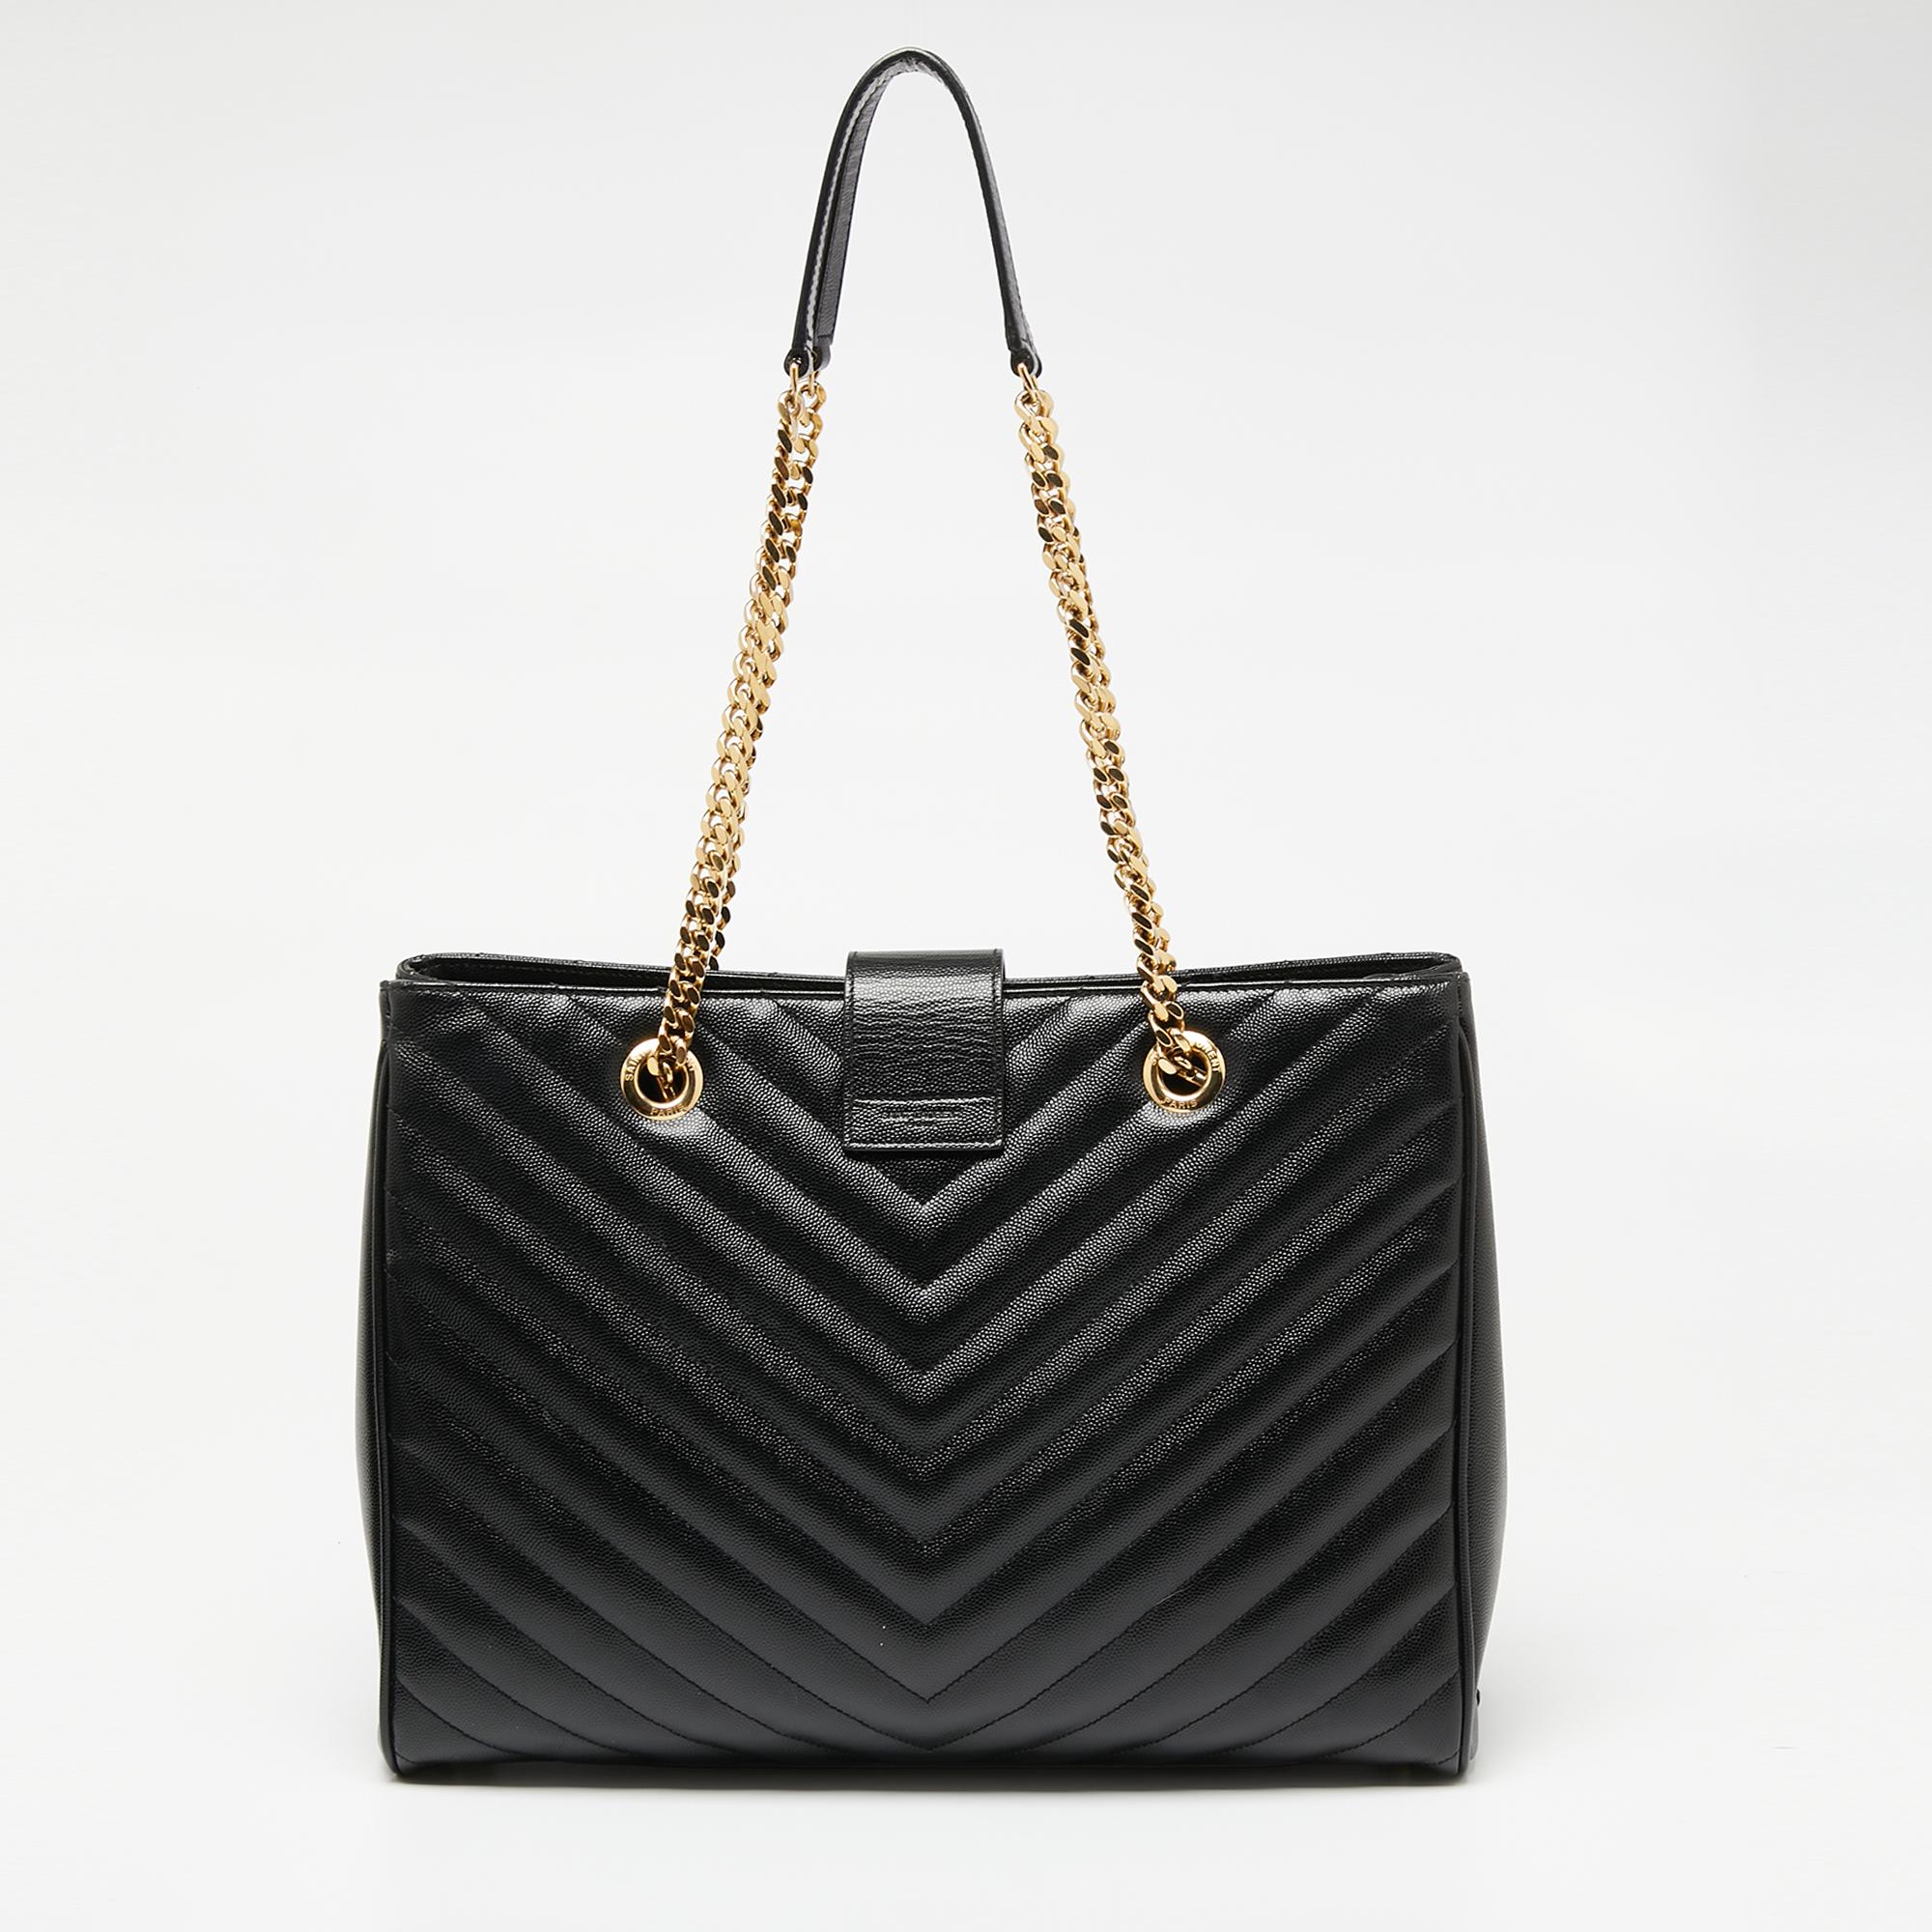 This exquisite tote from Saint Laurent is a chic accessory that represents the brand's rich aesthetics and elegant designs. Crafted from black leather, this easy-to-carry bag has a flap style with the YSL logo in gold-tone on the front. The